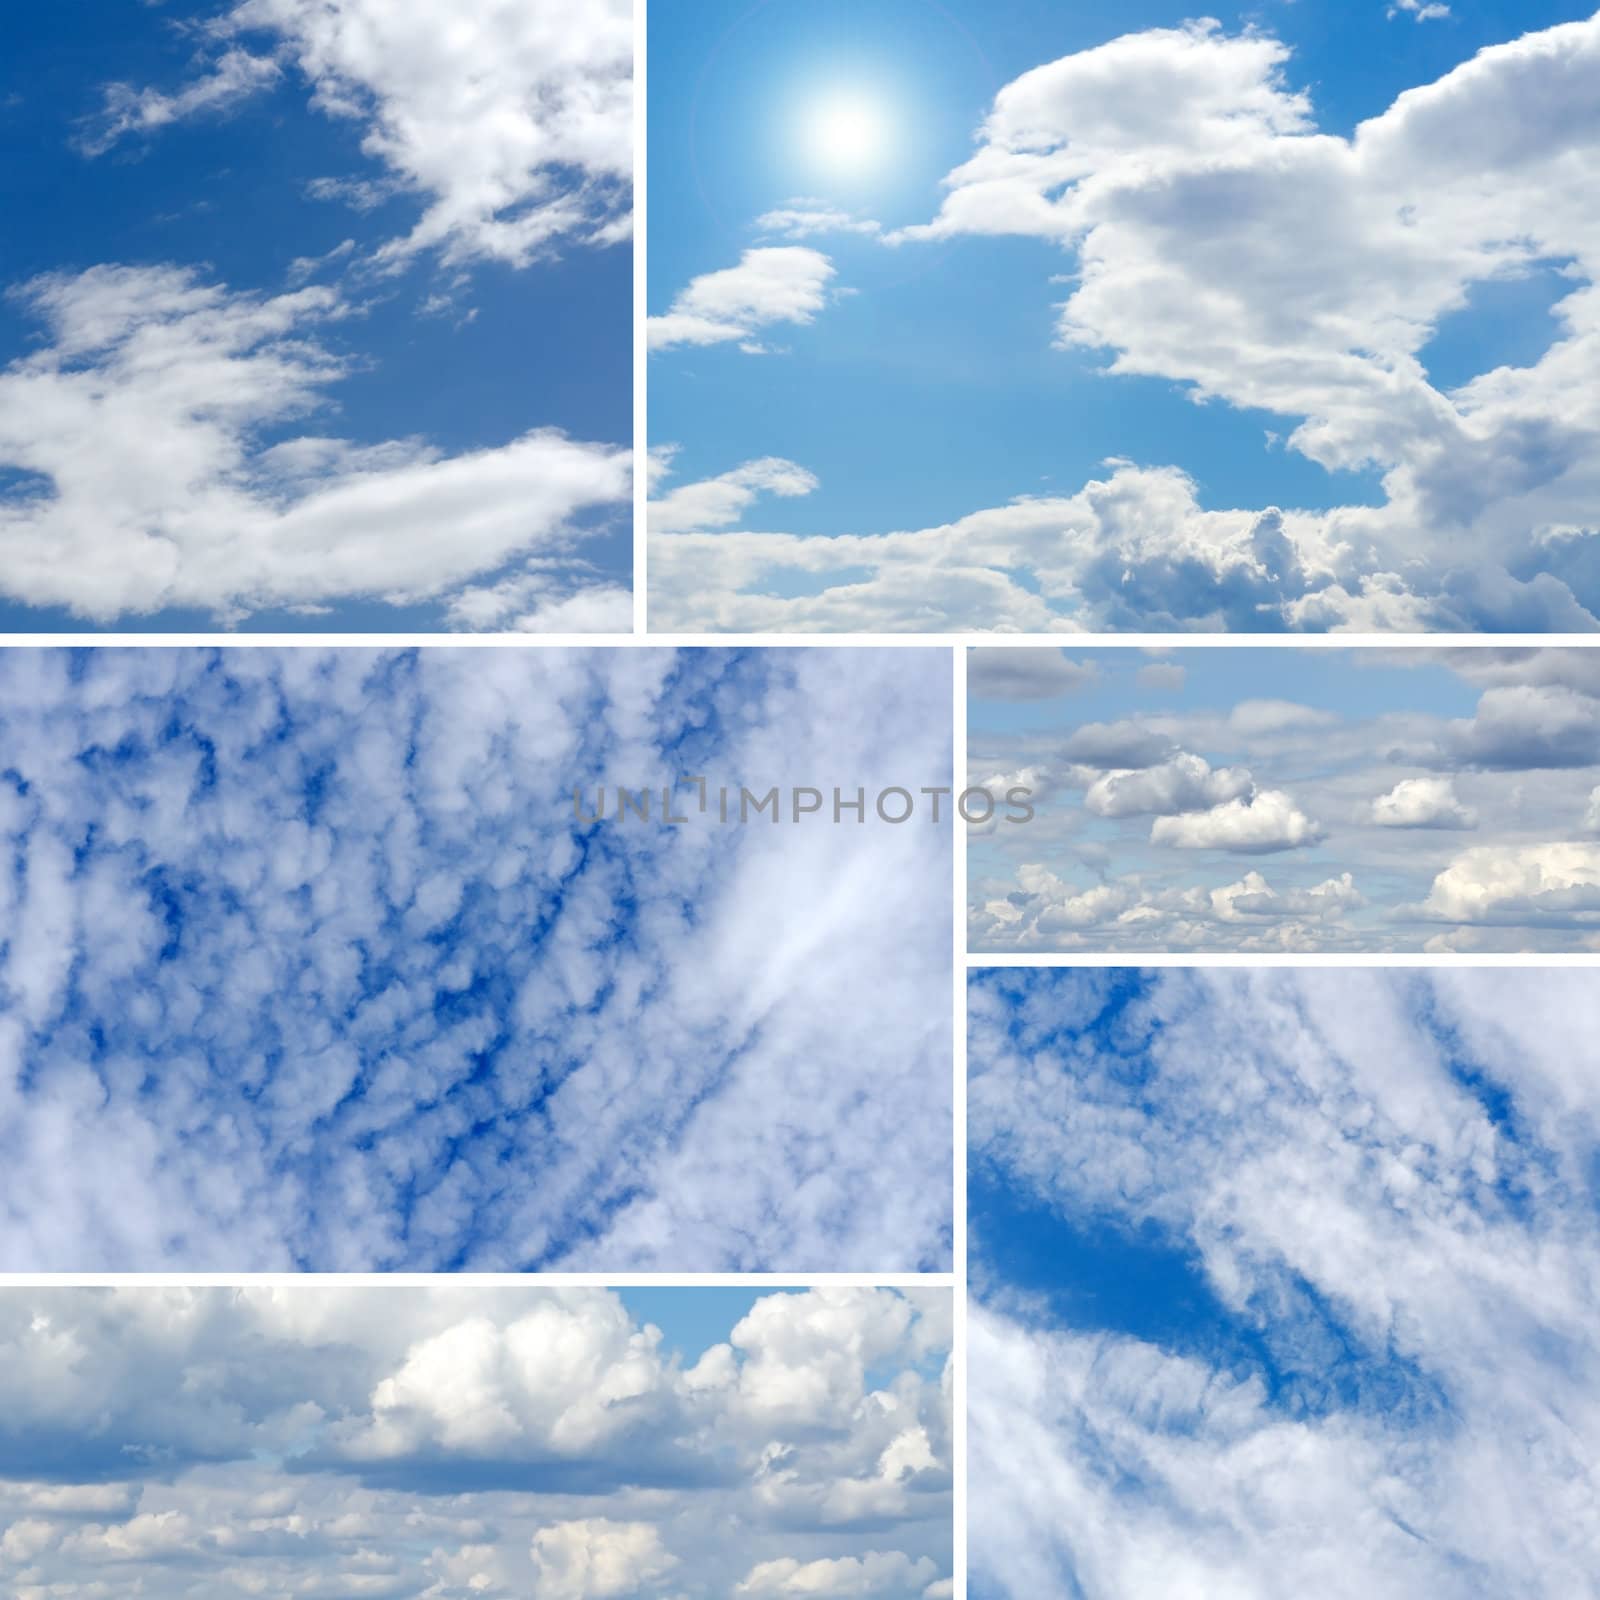 Clouds Collage by milinz